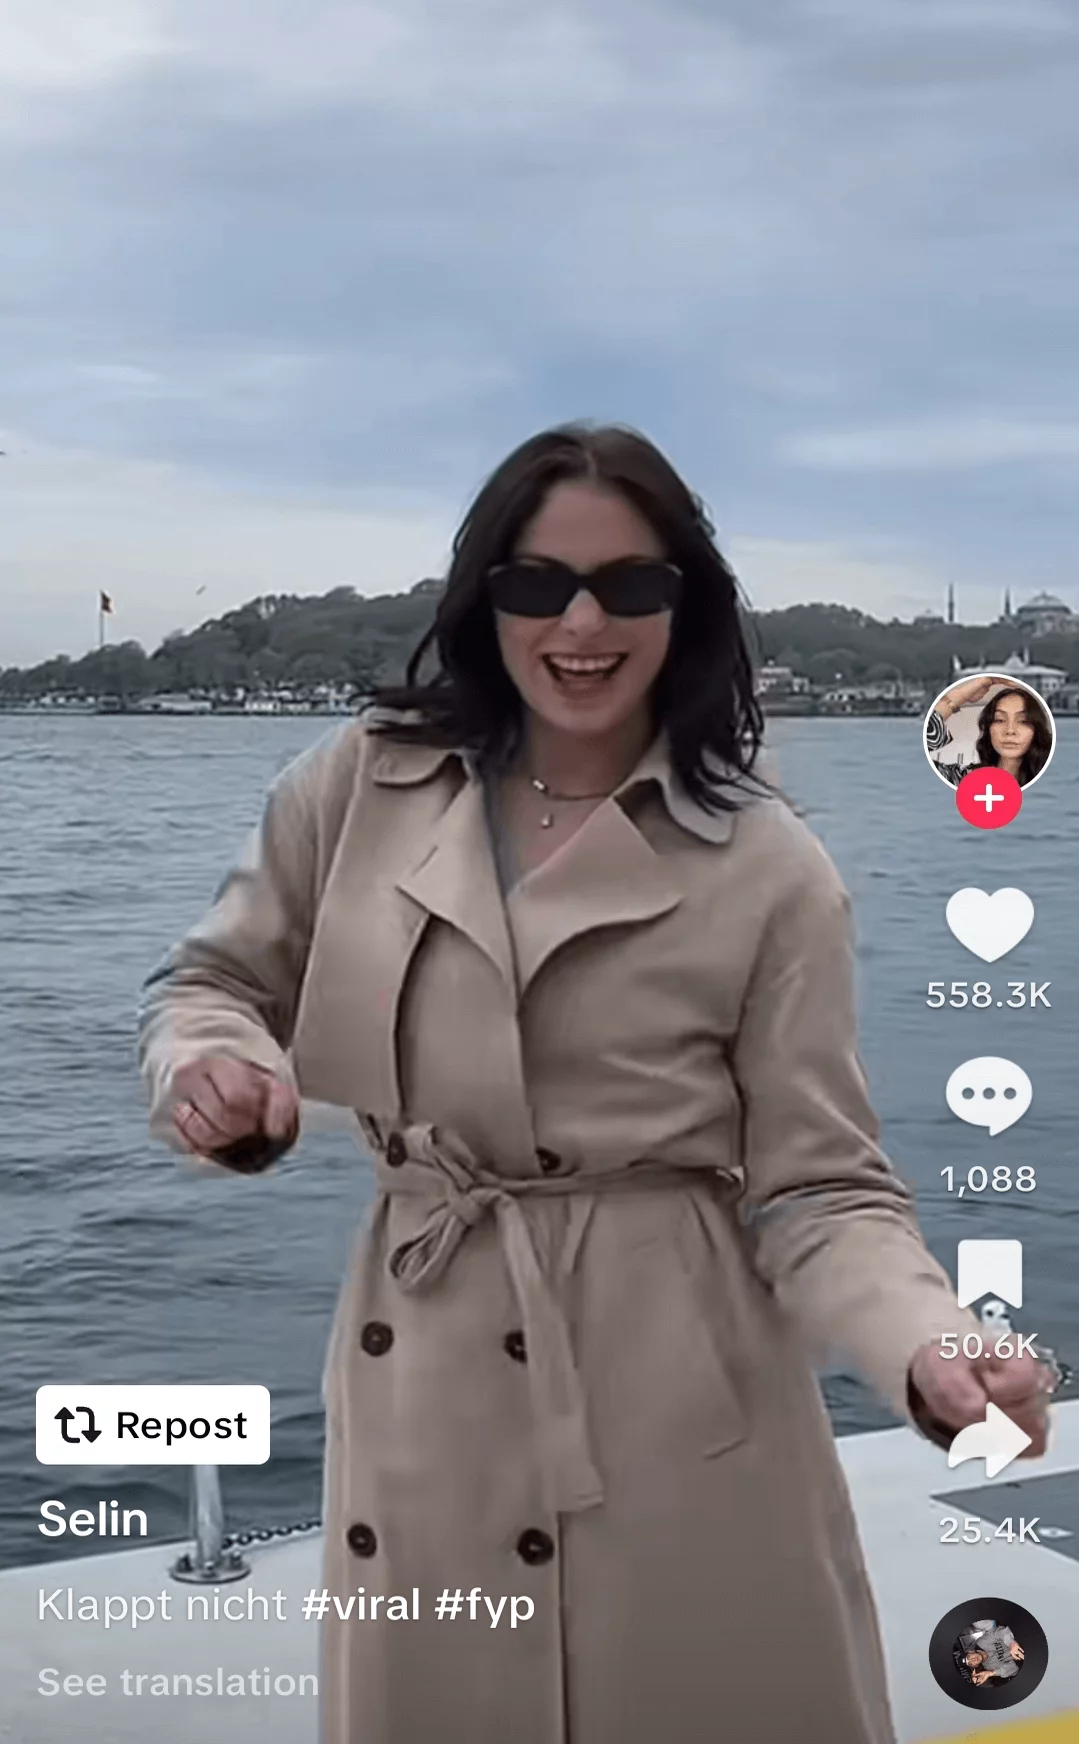 Joyful woman in a stylish trench coat and sunglasses, smiling and enjoying a boat ride, shared in a social media post.